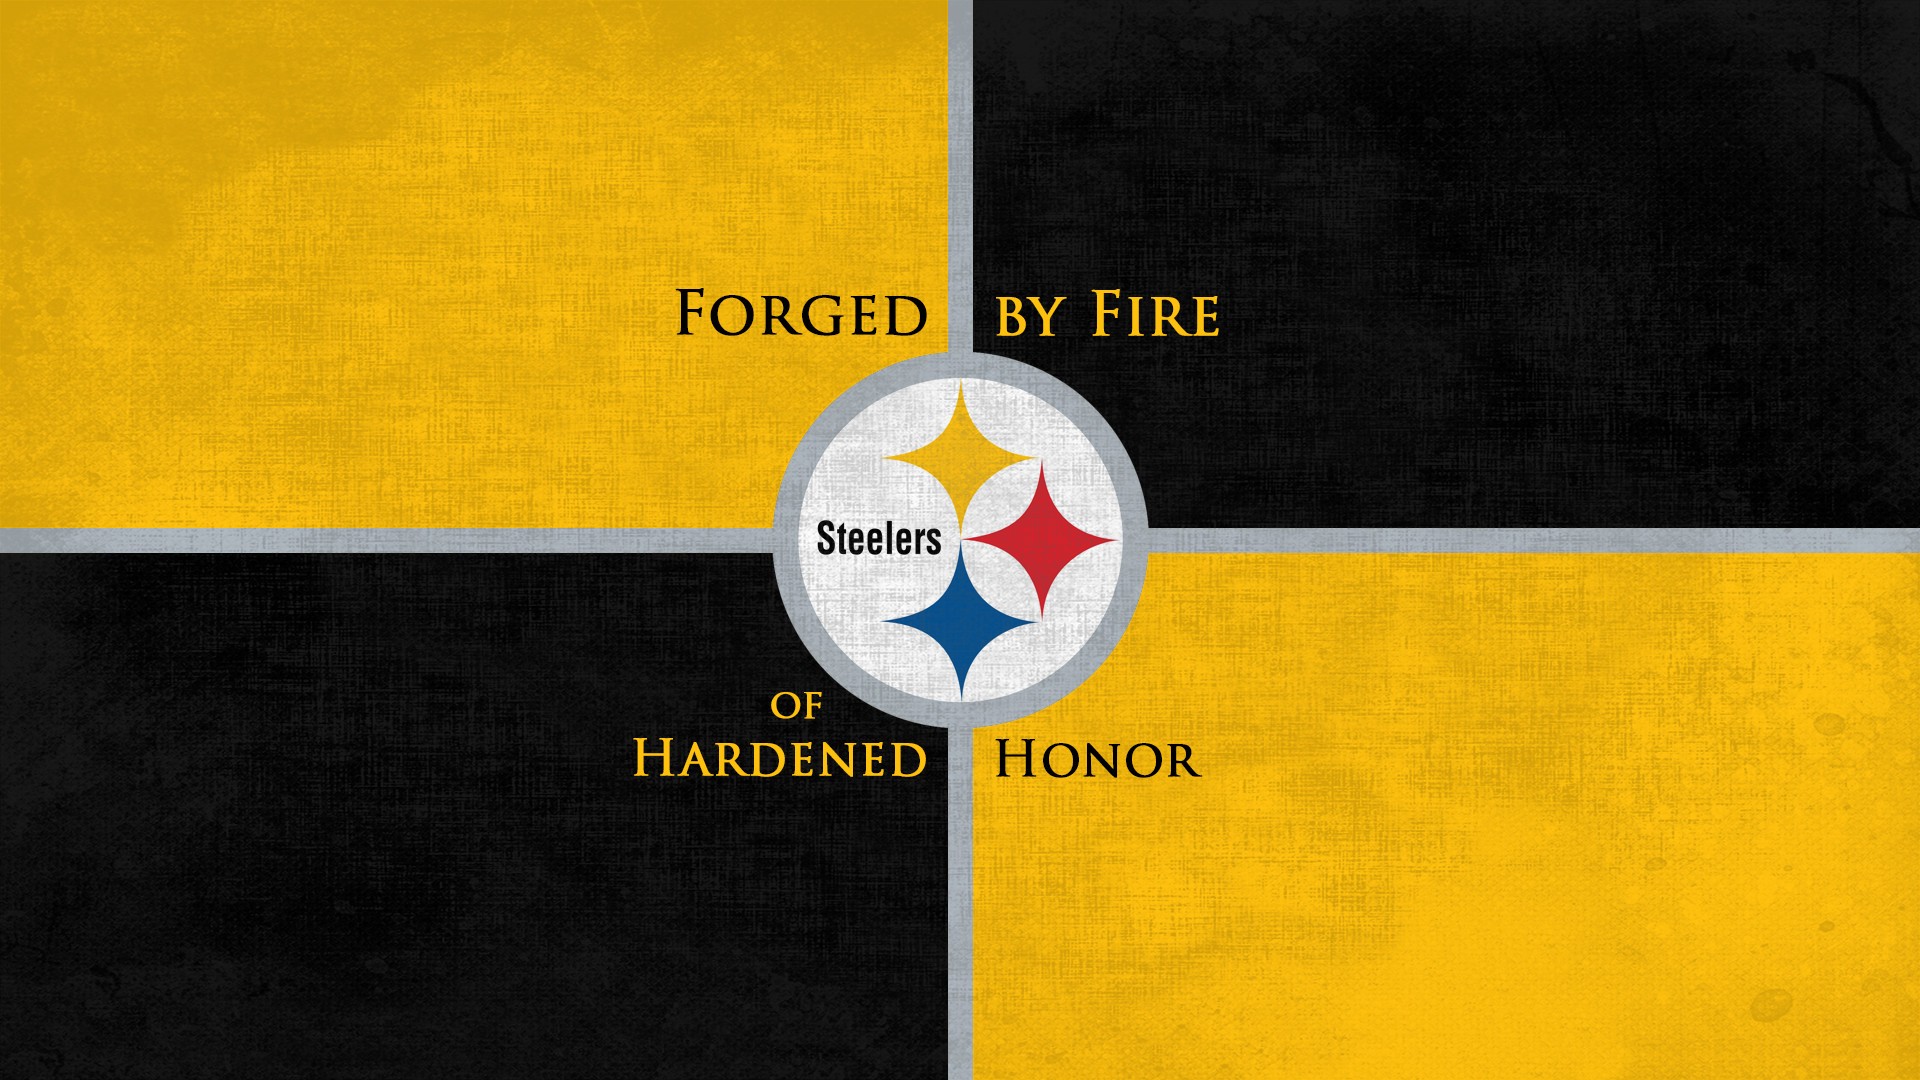 Steelers Logo For PC Wallpaper With Resolution 1920X1080 pixel. You can make this wallpaper for your Mac or Windows Desktop Background, iPhone, Android or Tablet and another Smartphone device for free